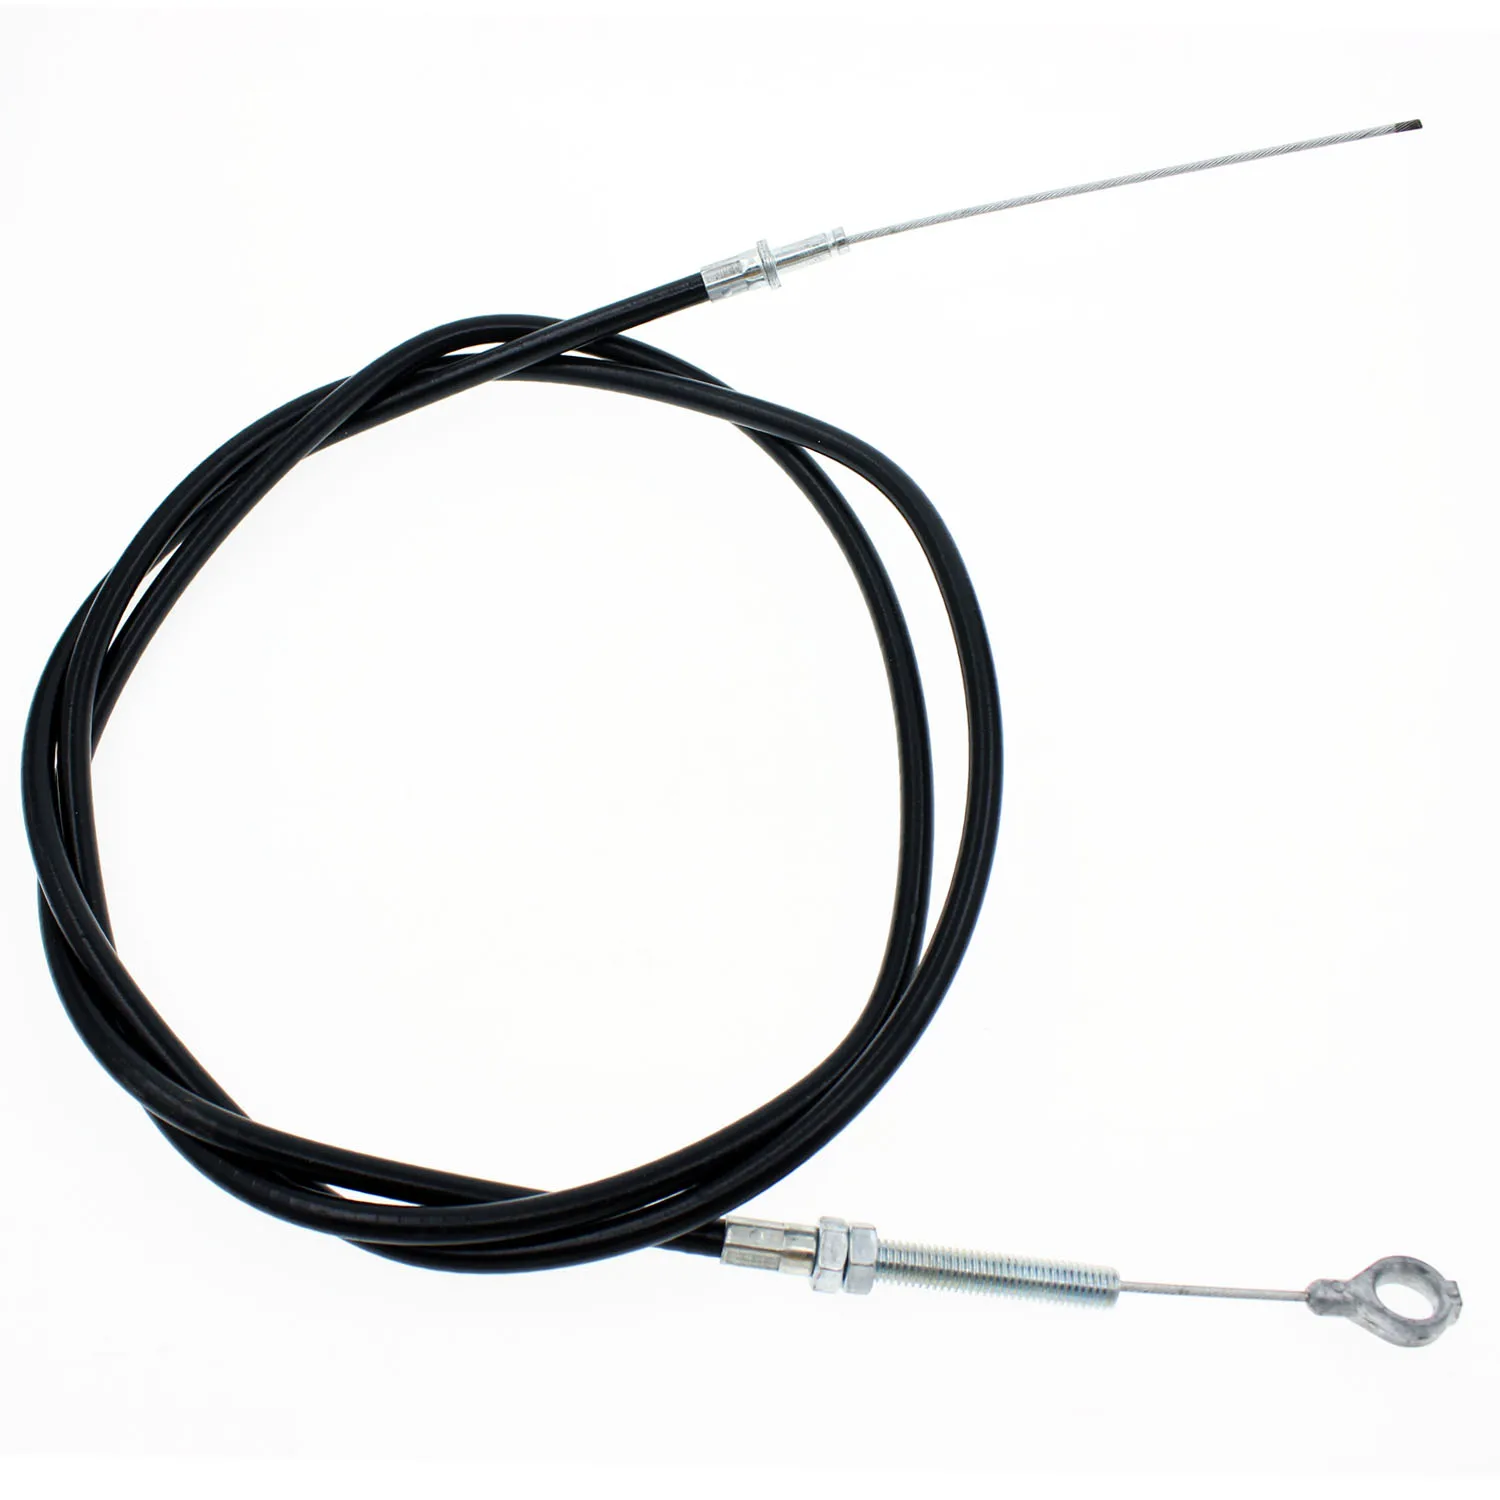 72" Throttle Cable for Manco ASW Go Kart w/63" Casing 8252-1390 Fun Kart Useful 